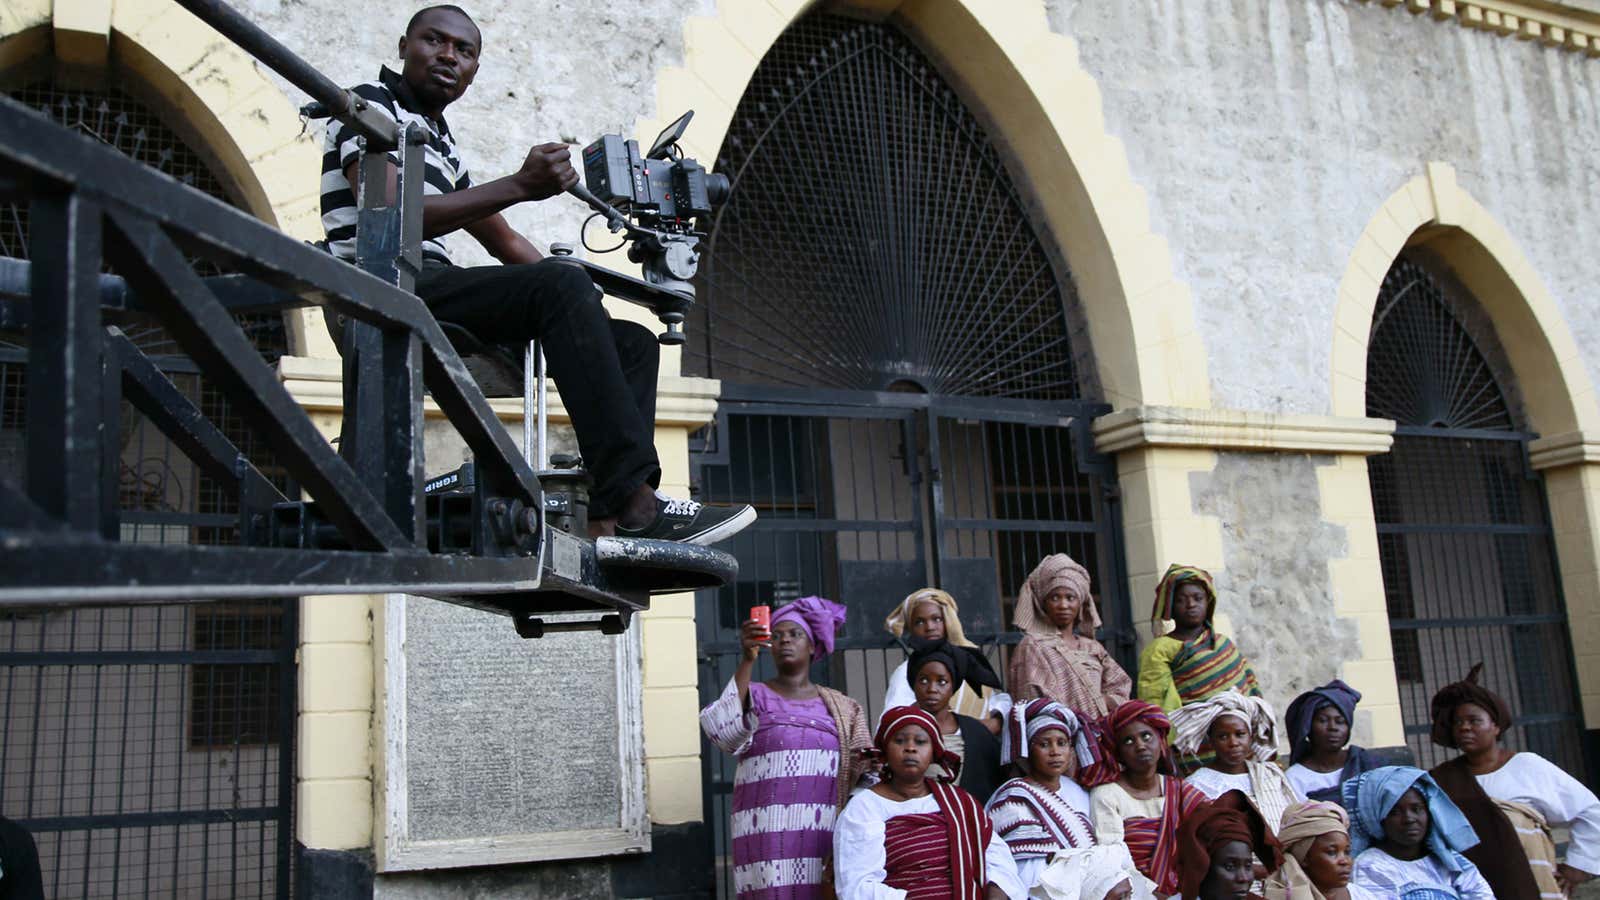 Nollywood has inspired other African movie industries